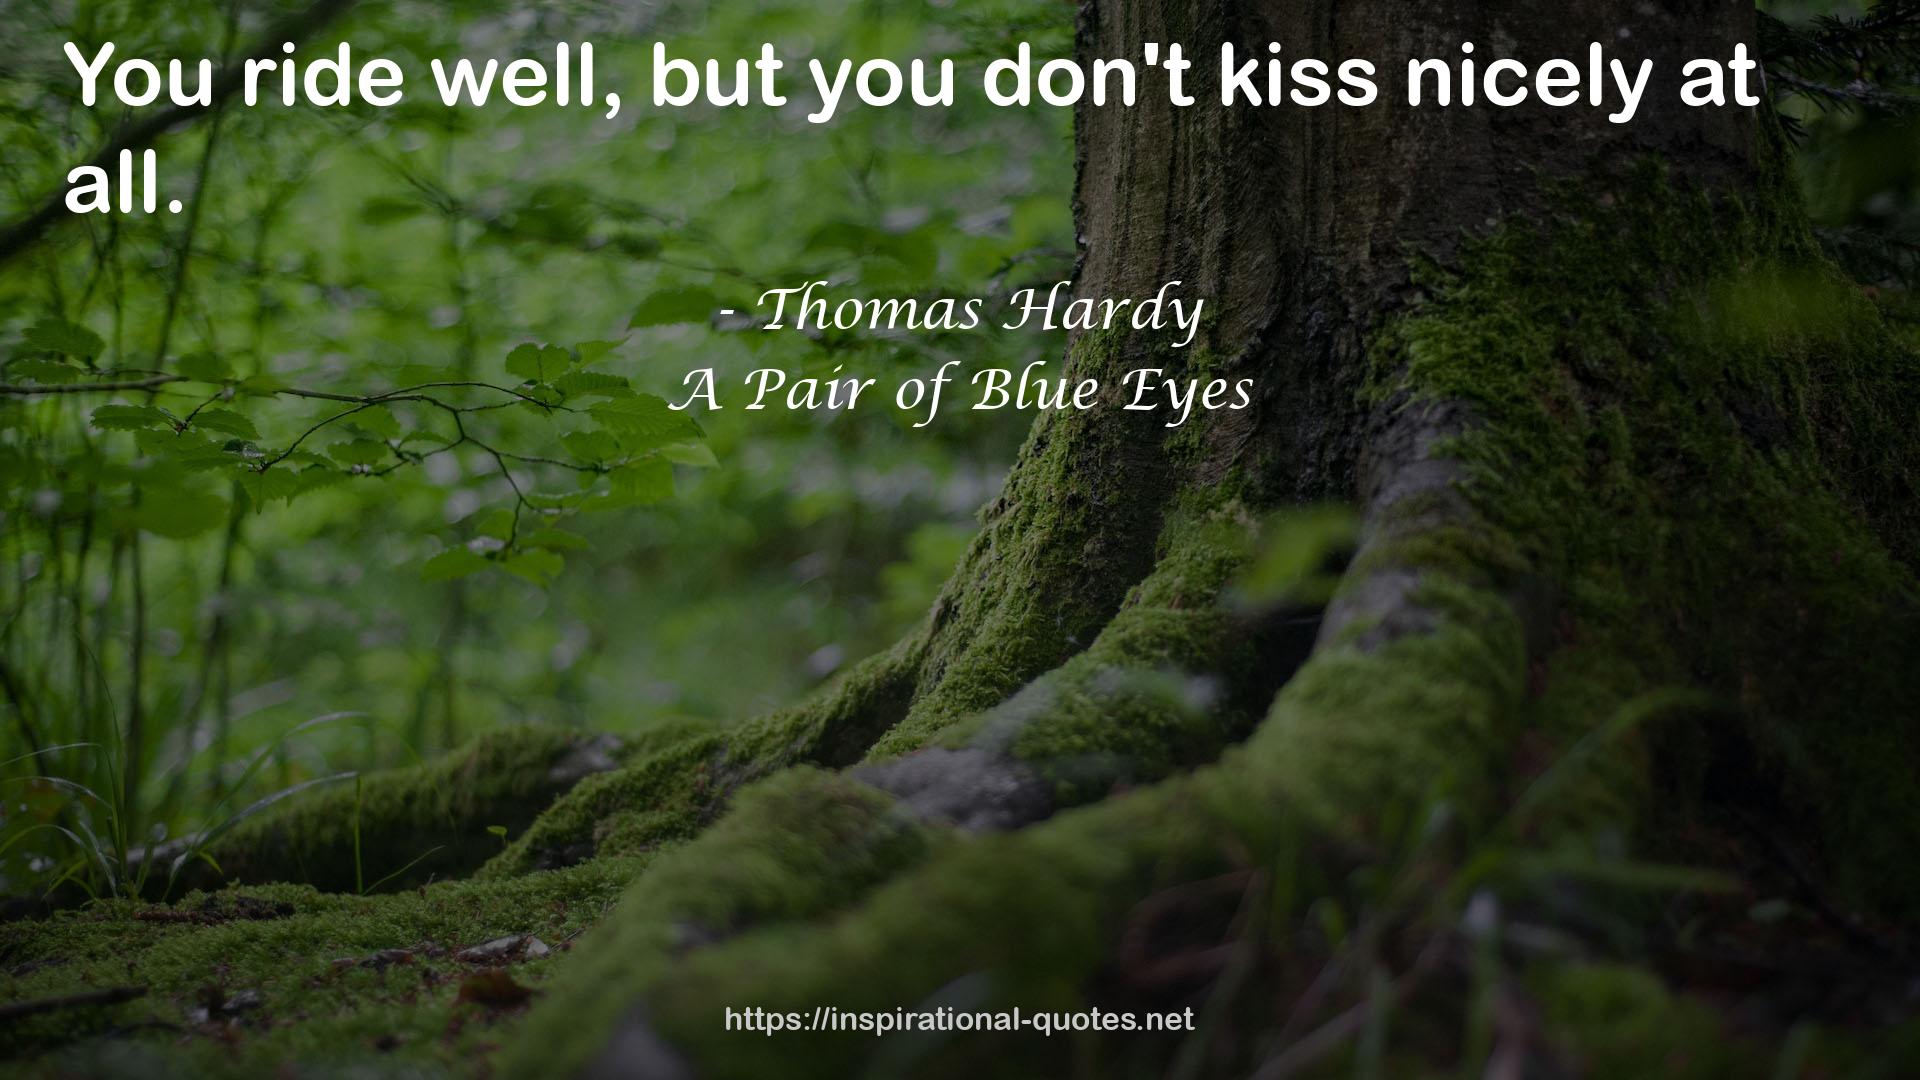 A Pair of Blue Eyes QUOTES